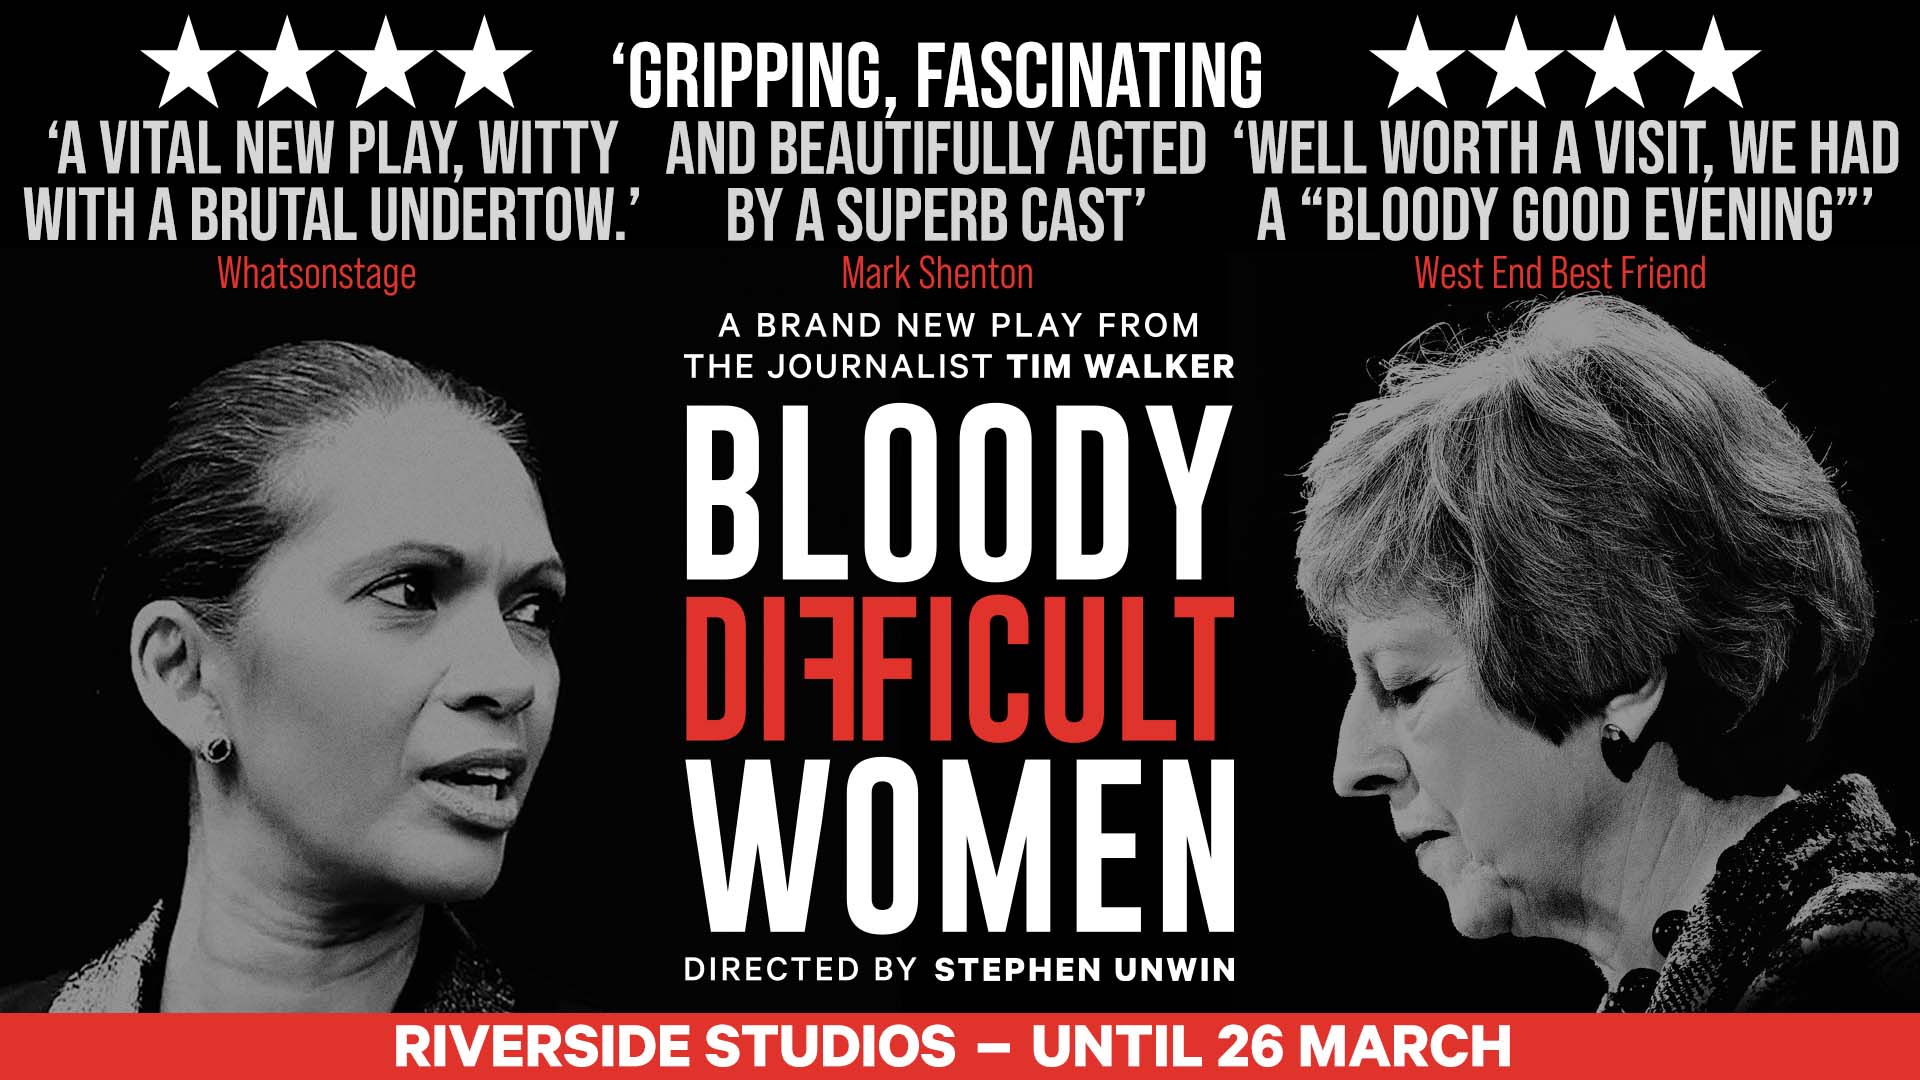 There are no winners in the story as Mrs Miller stands against Mrs May in the court case. Buy Bloody Difficult Women tickets.